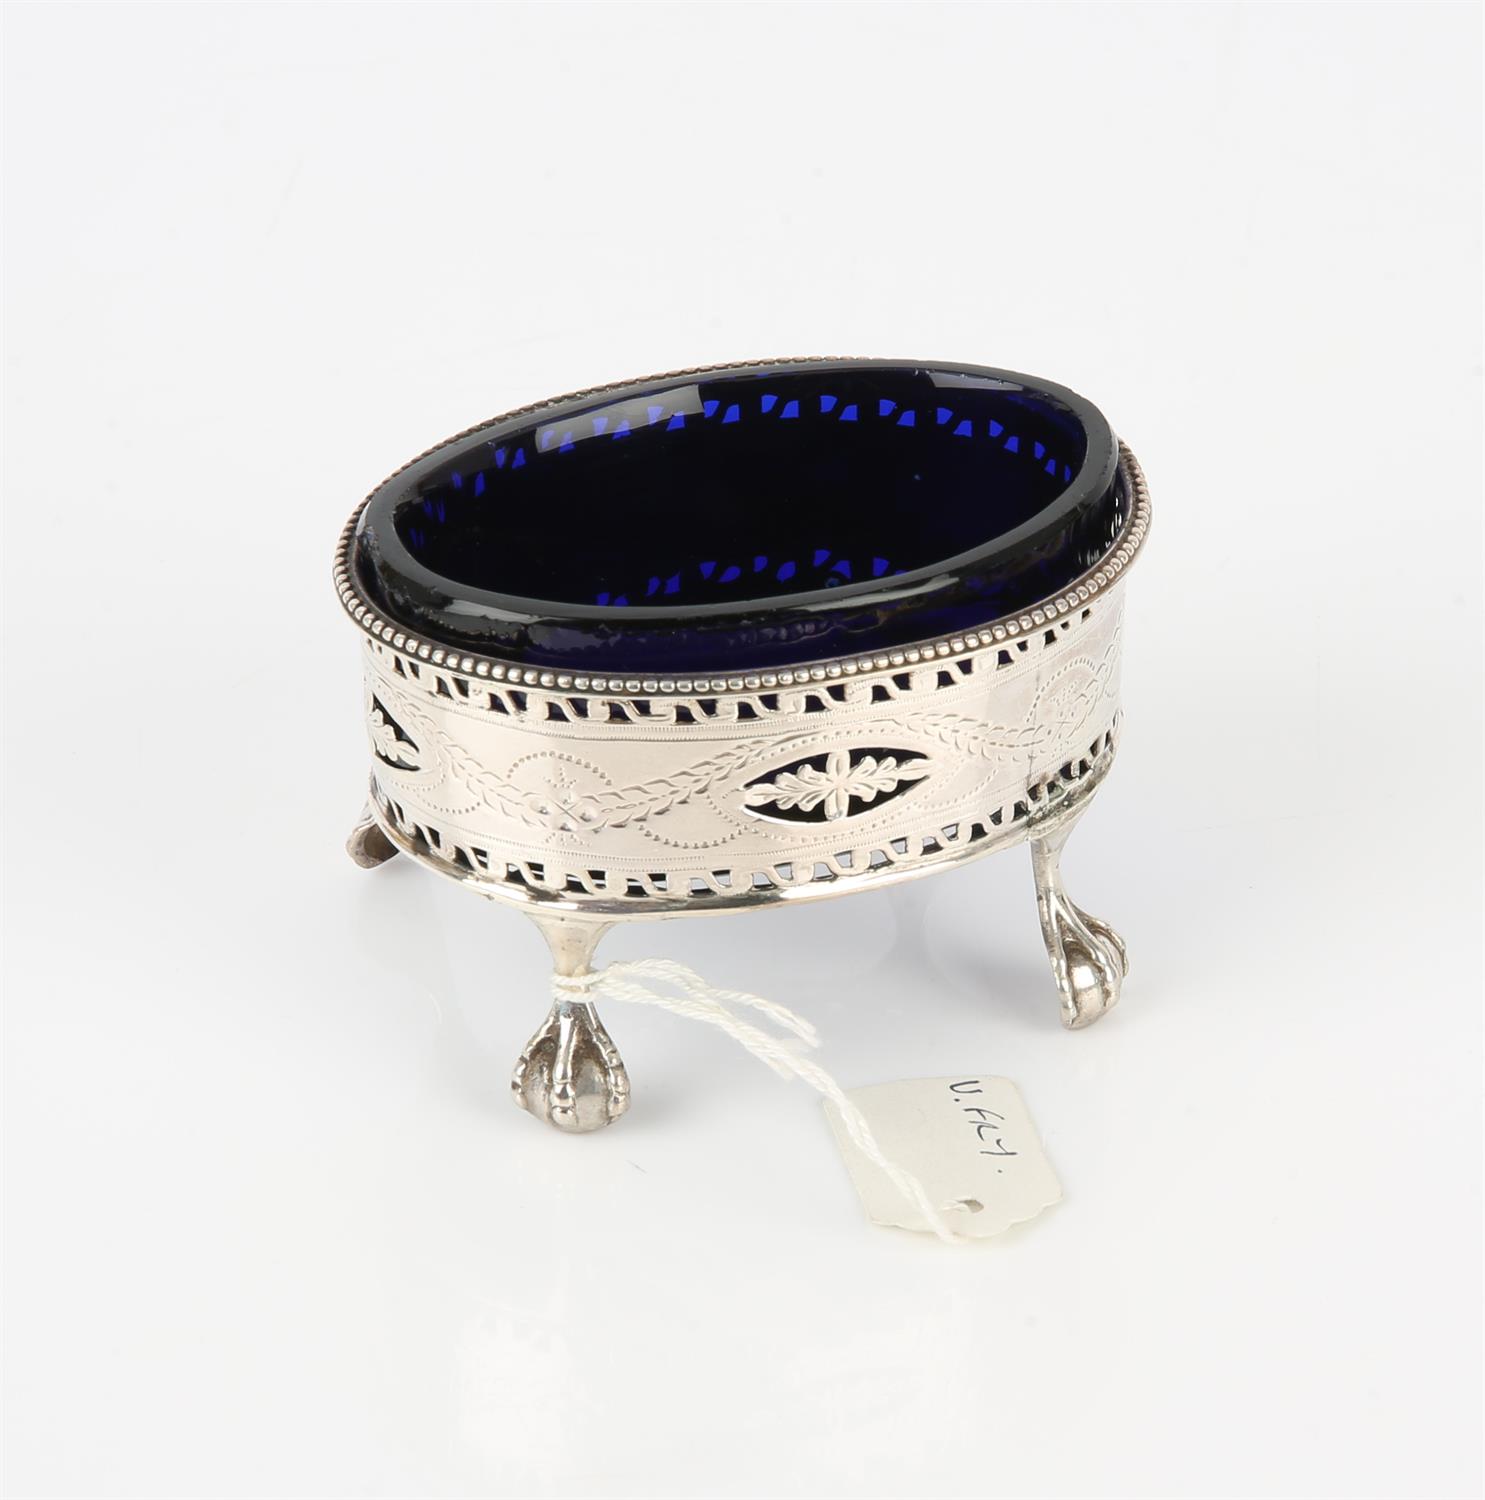 George III oval silver salt with pierced decoration, by Hester Bateman, blue glass liner, 1. - Image 2 of 2